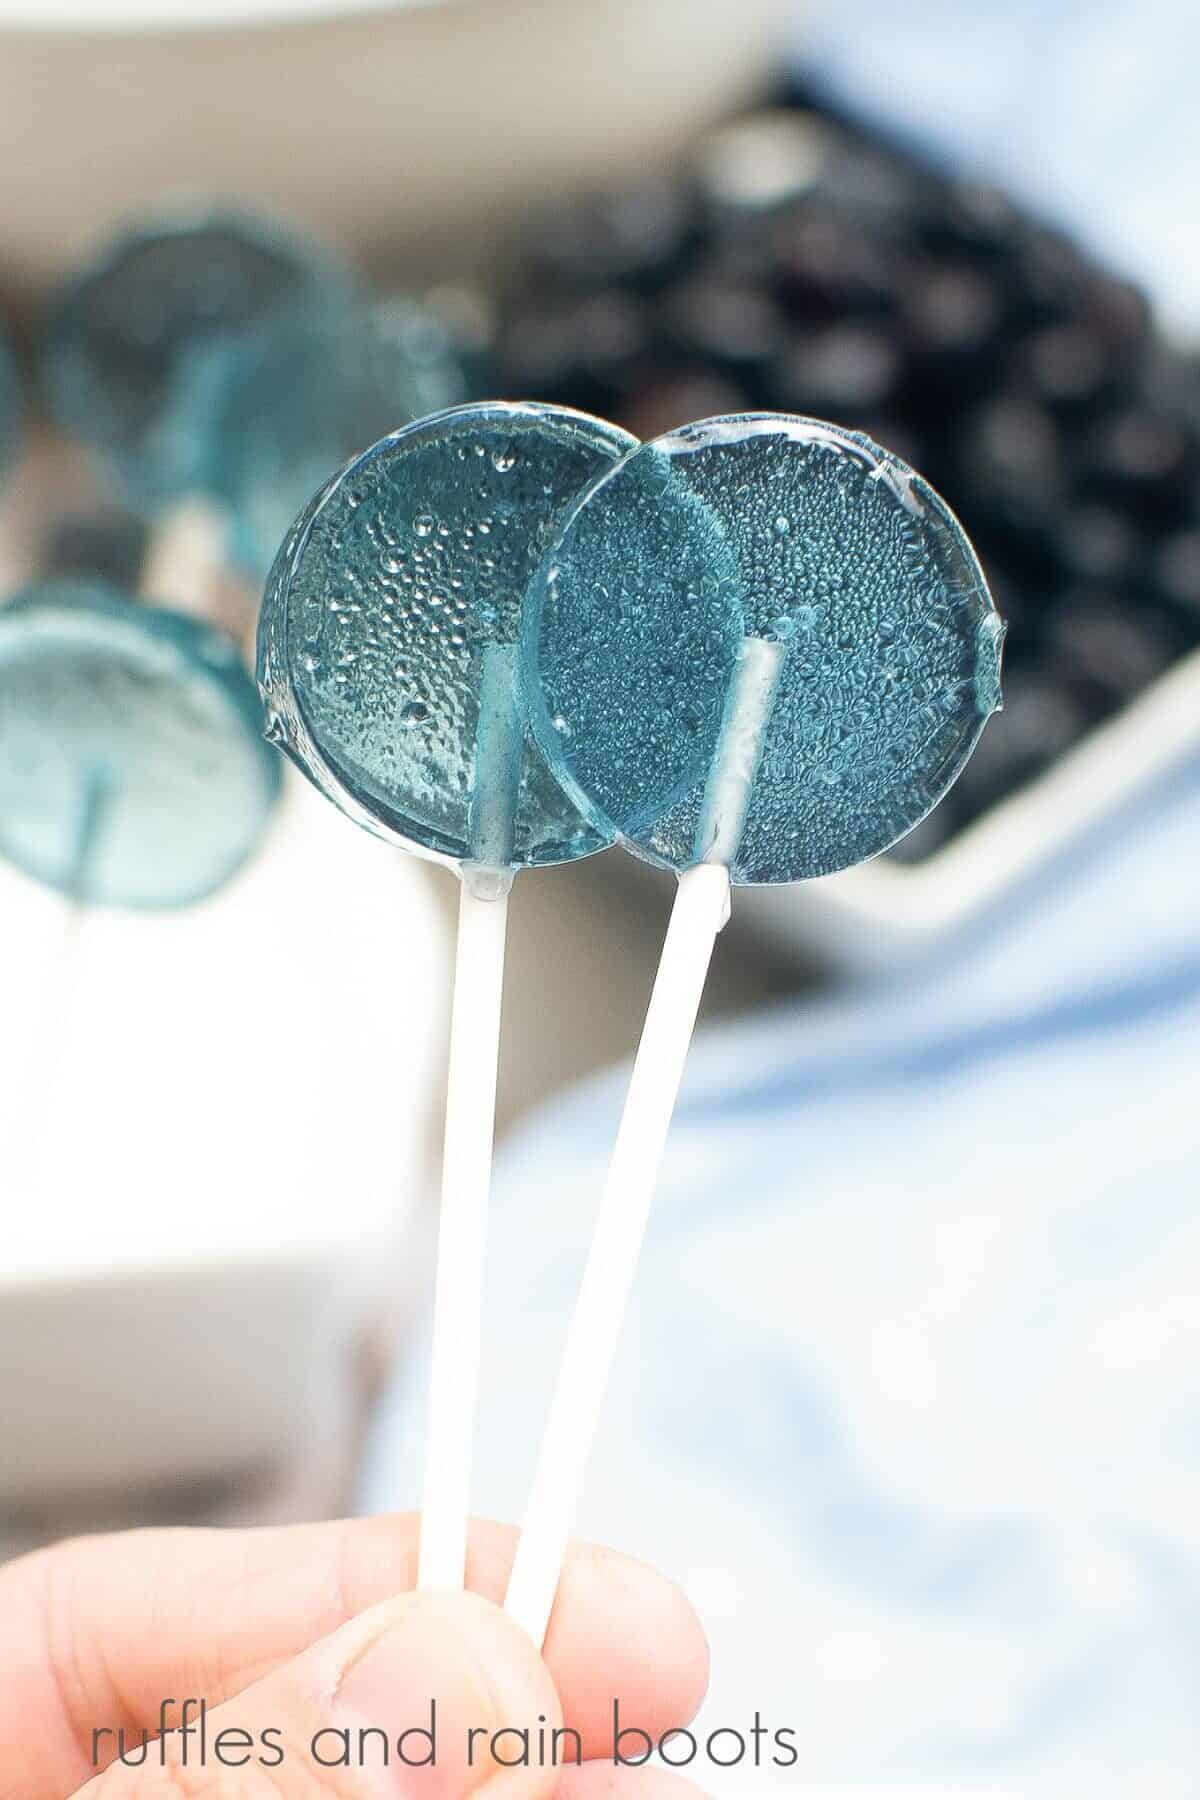 A hand holding two blueberry lollipops with a bowl of fresh blueberries in the background next to a blue towel.